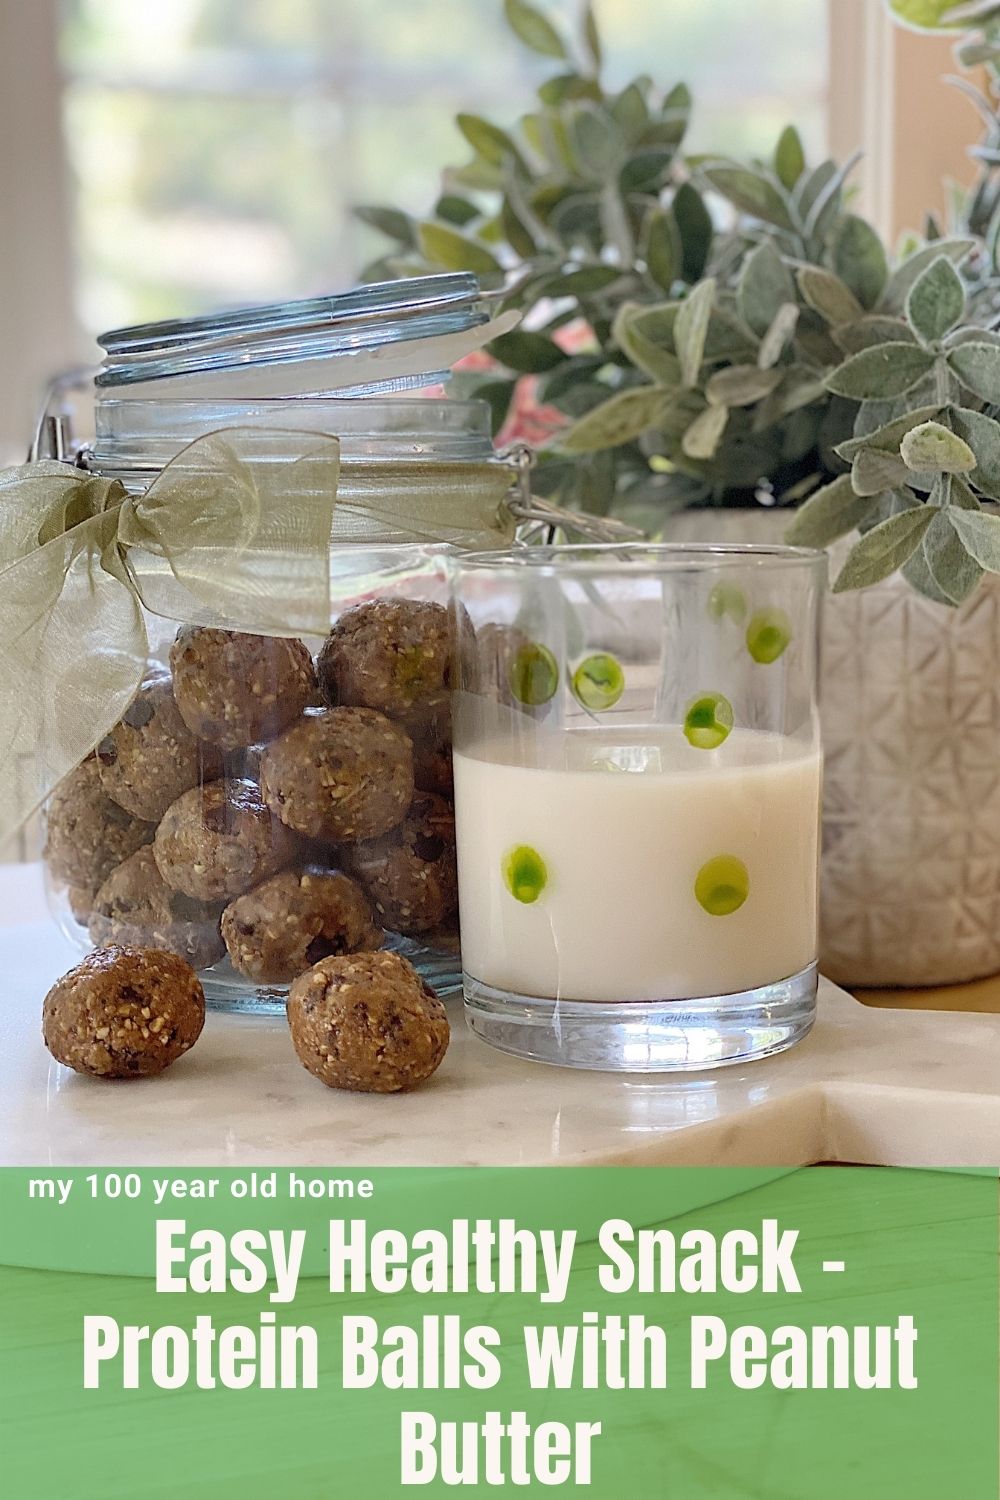 I created the best tasting and easy healthy snack. I used trial and error and created these Protein Balls with Peanut Butter and they are amazing.